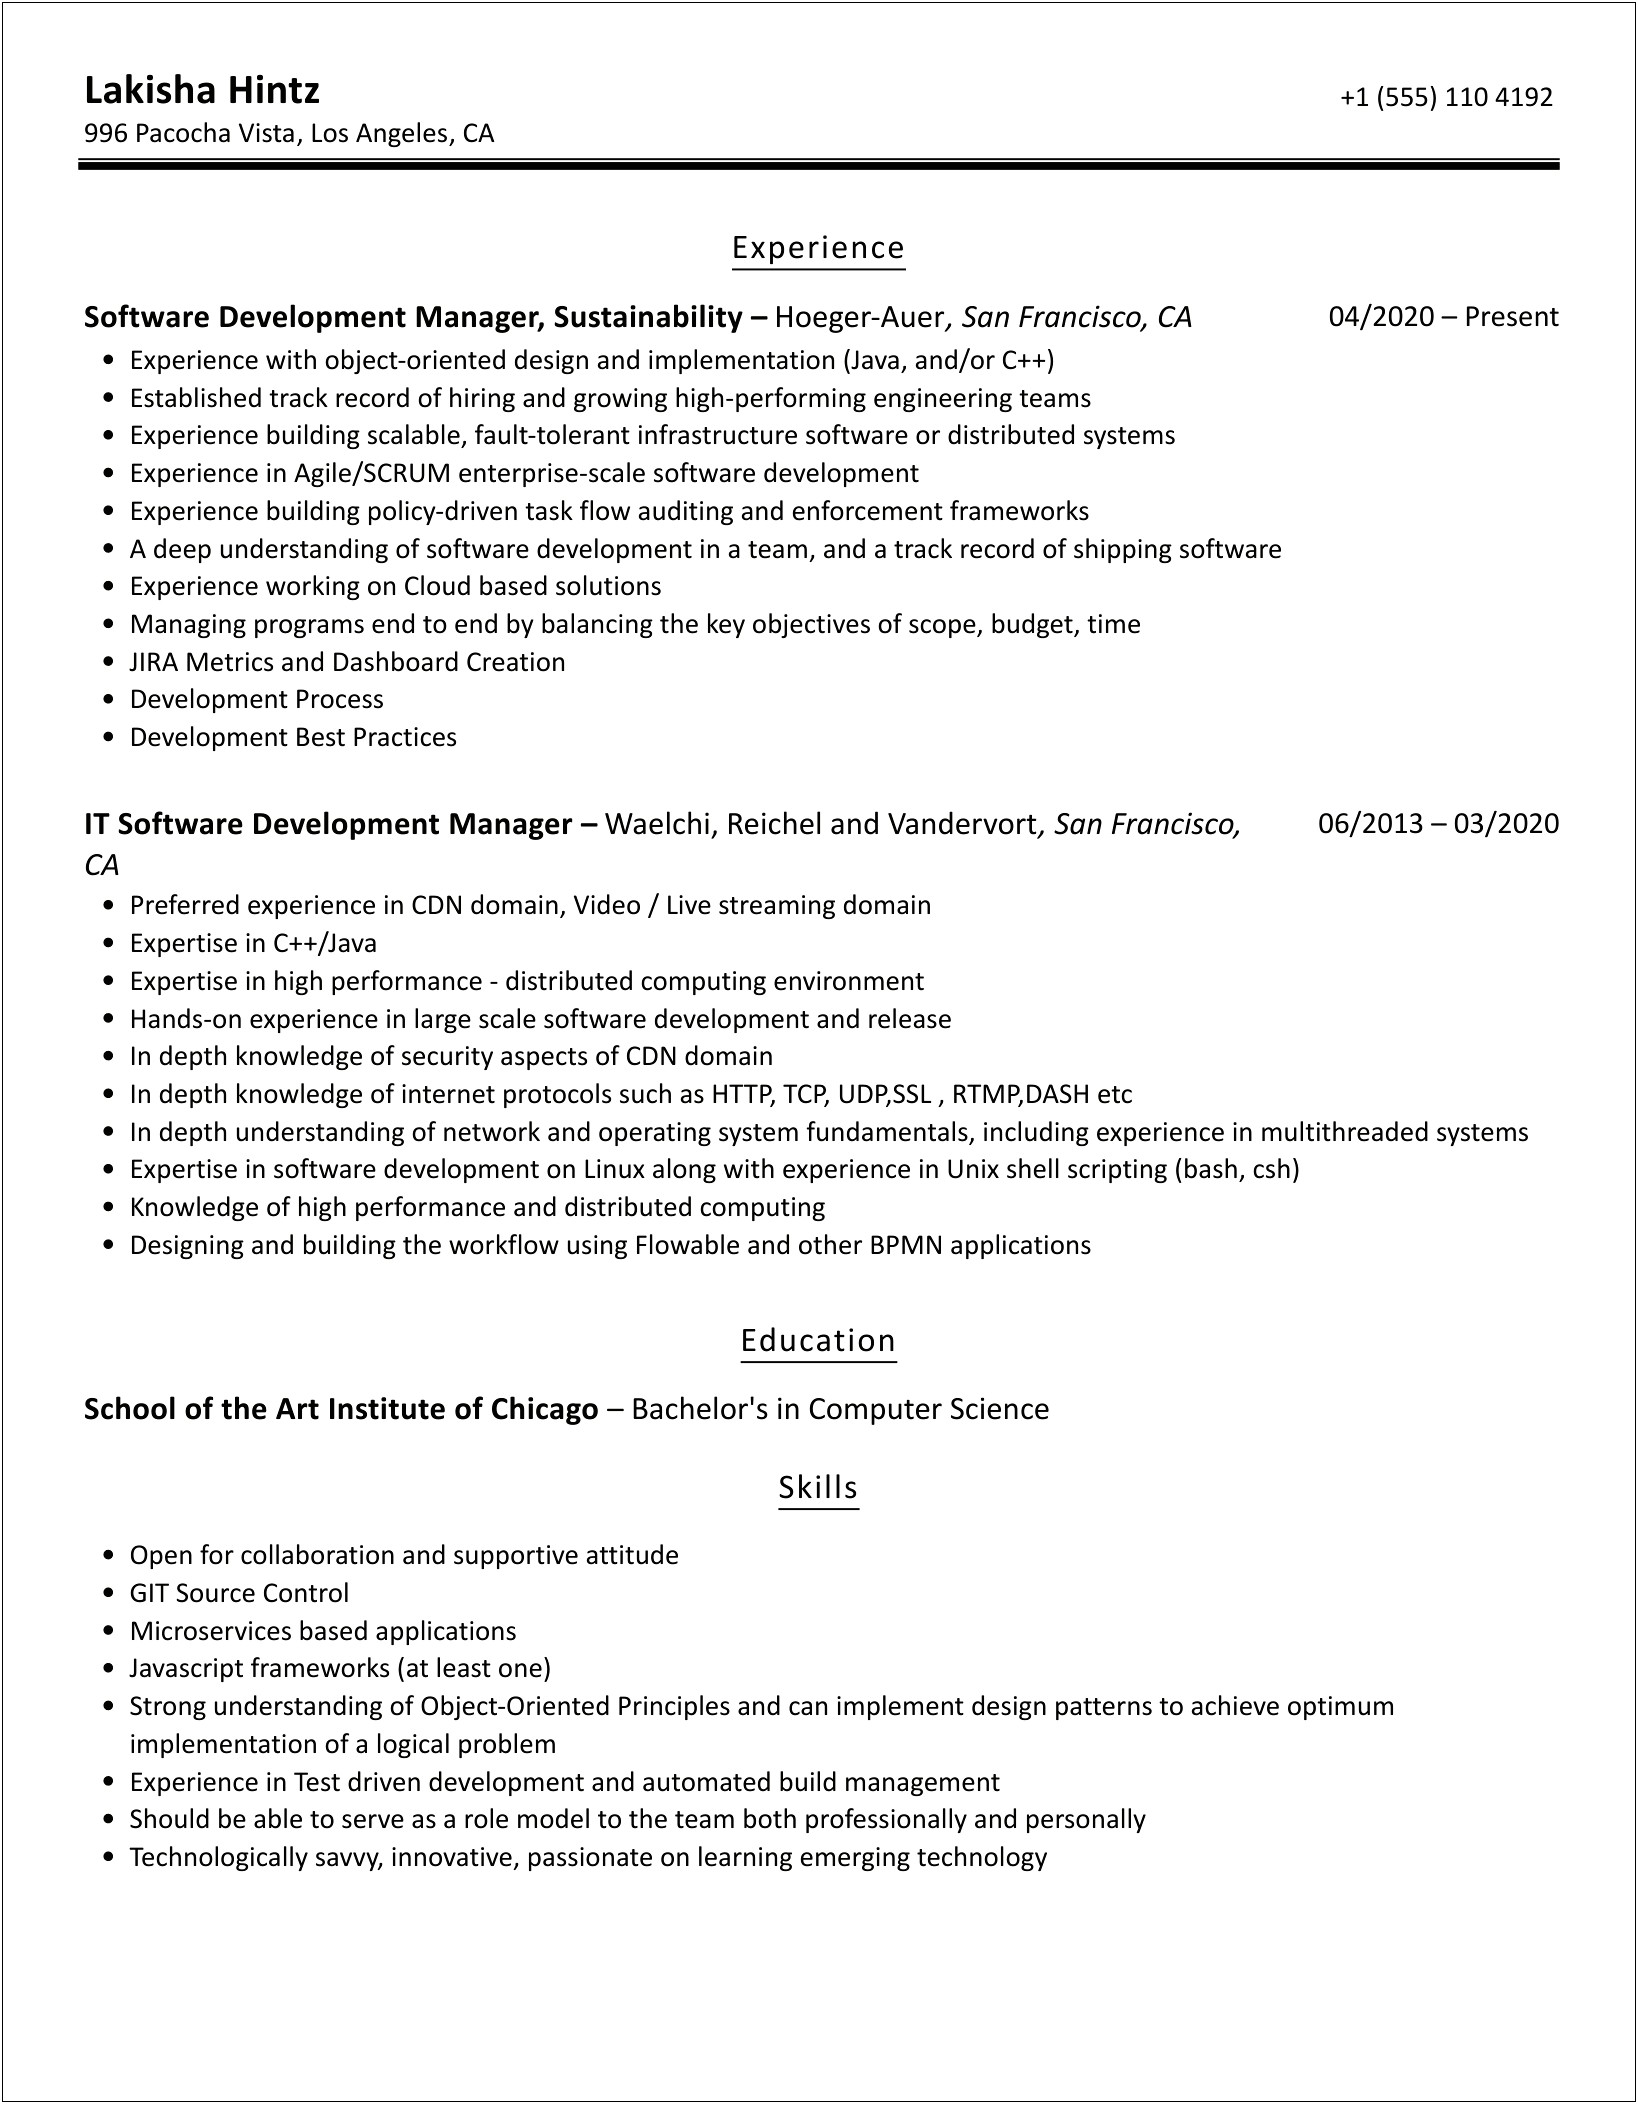 Software Development Manager Core Competencies Resume